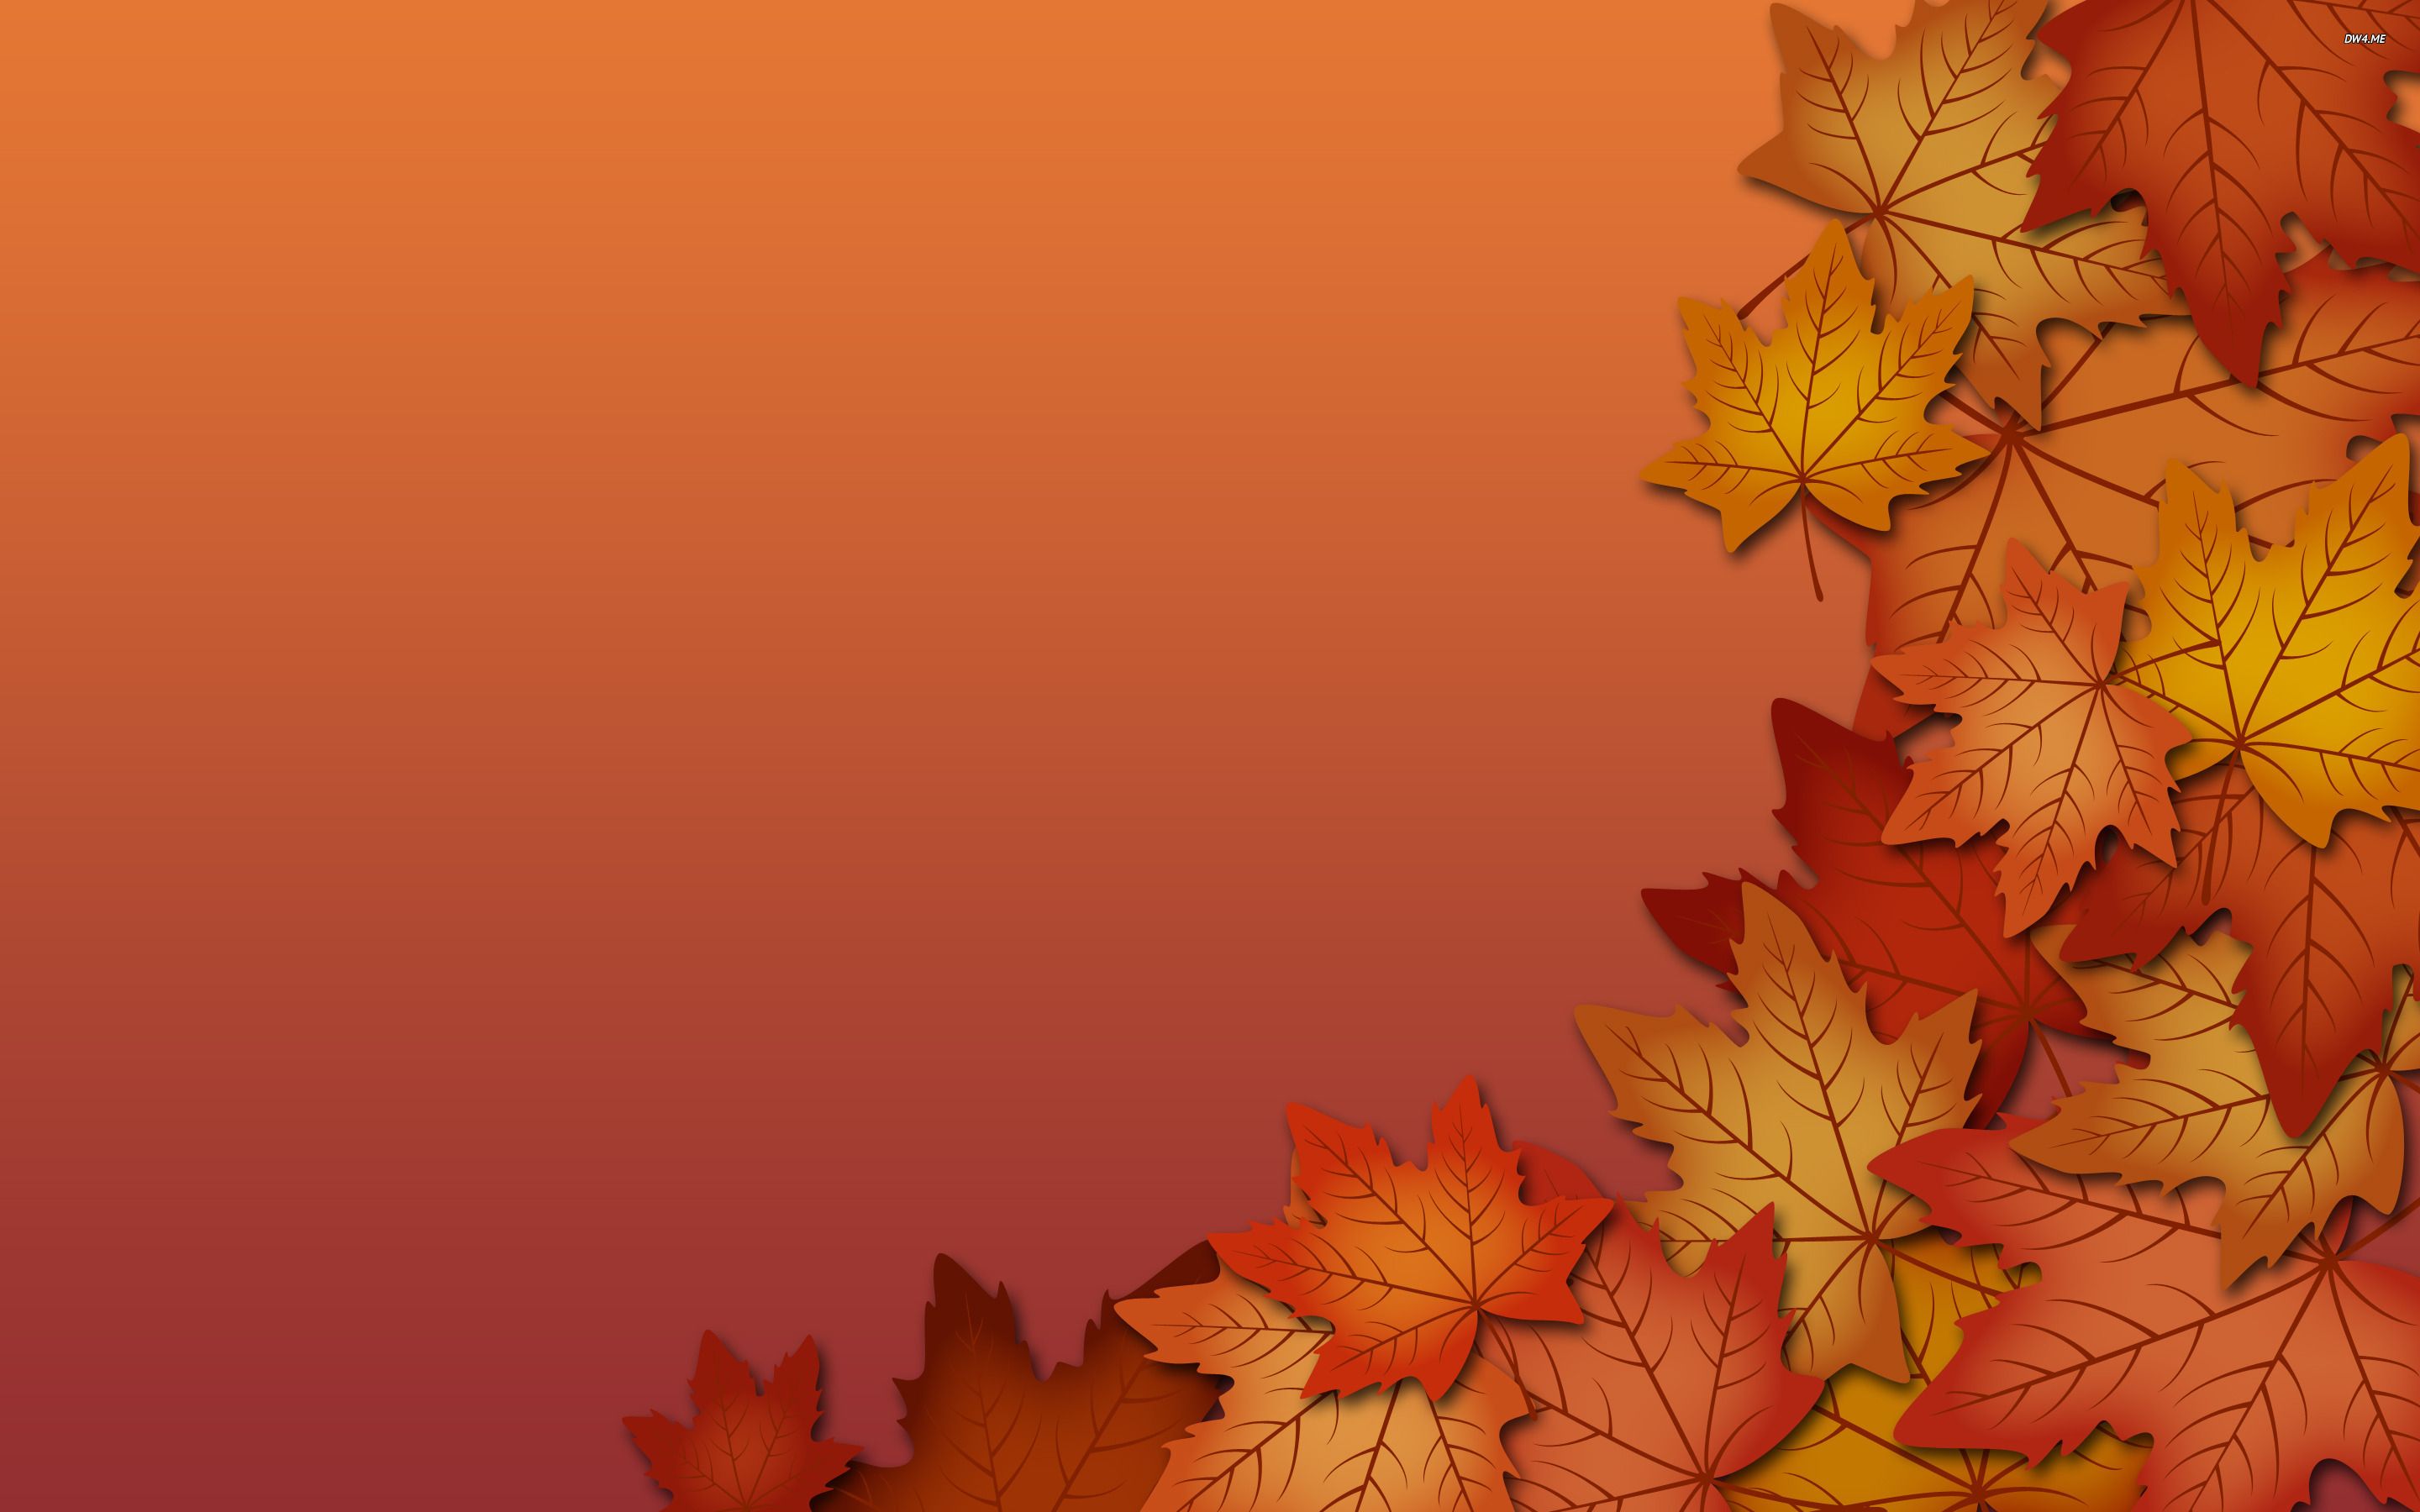 fall wallpaper for computer background. Autumn leaves wallpaper. Autumn leaves wallpaper, Fall wallpaper, Leaf wallpaper